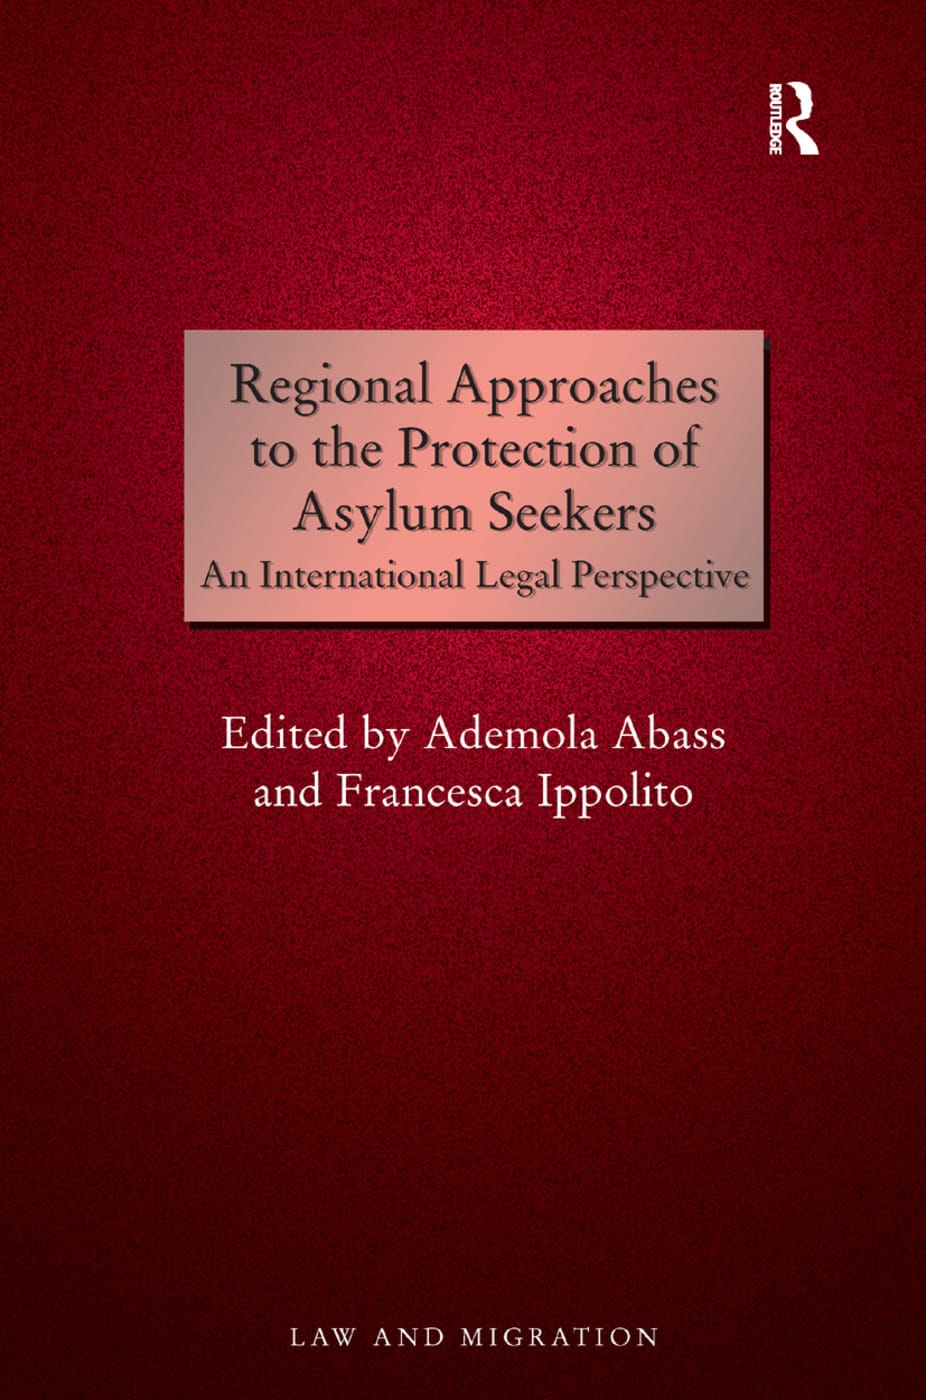 Regional Approaches to the Protection of Asylum Seekers: An International Legal Perspective. Edited by Ademola Abass, Francesca Ippolito